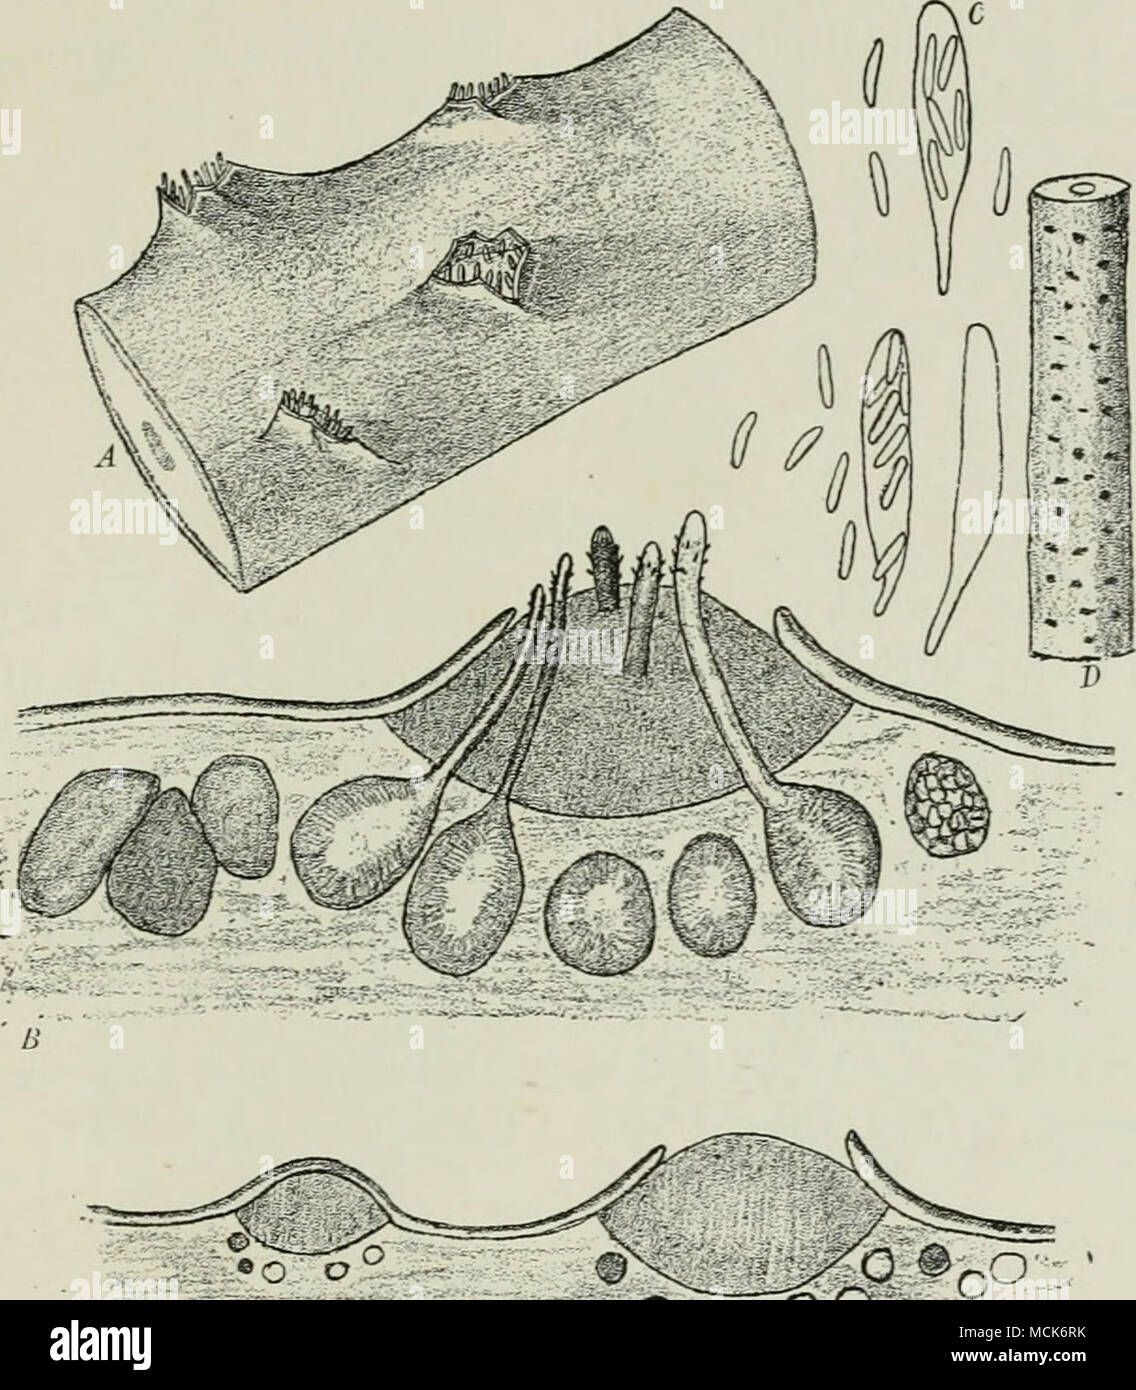 . oo OG K- Fig. 109.—Fa/«a oxystoma on Alnus viridls. A, Portion of branch with stroma of Vaha breaking through the periderm at four places. B, Enlarged section through a stroma from A. C, Asci and ascospores, isolated from a perithecium. D, Portion of younger branch with periderm ruptured by stromata, in which, however, the perithecia are not yet developed. E, Enlarged section through a stroma of D. (After v. Tubeuf.) with the exterior by means of long projecting necks. The asci contain eight unicellular spores of a slightly bent, rod- like shape. Maturity is reached on the dry dead twigs. Ex Stock Photo